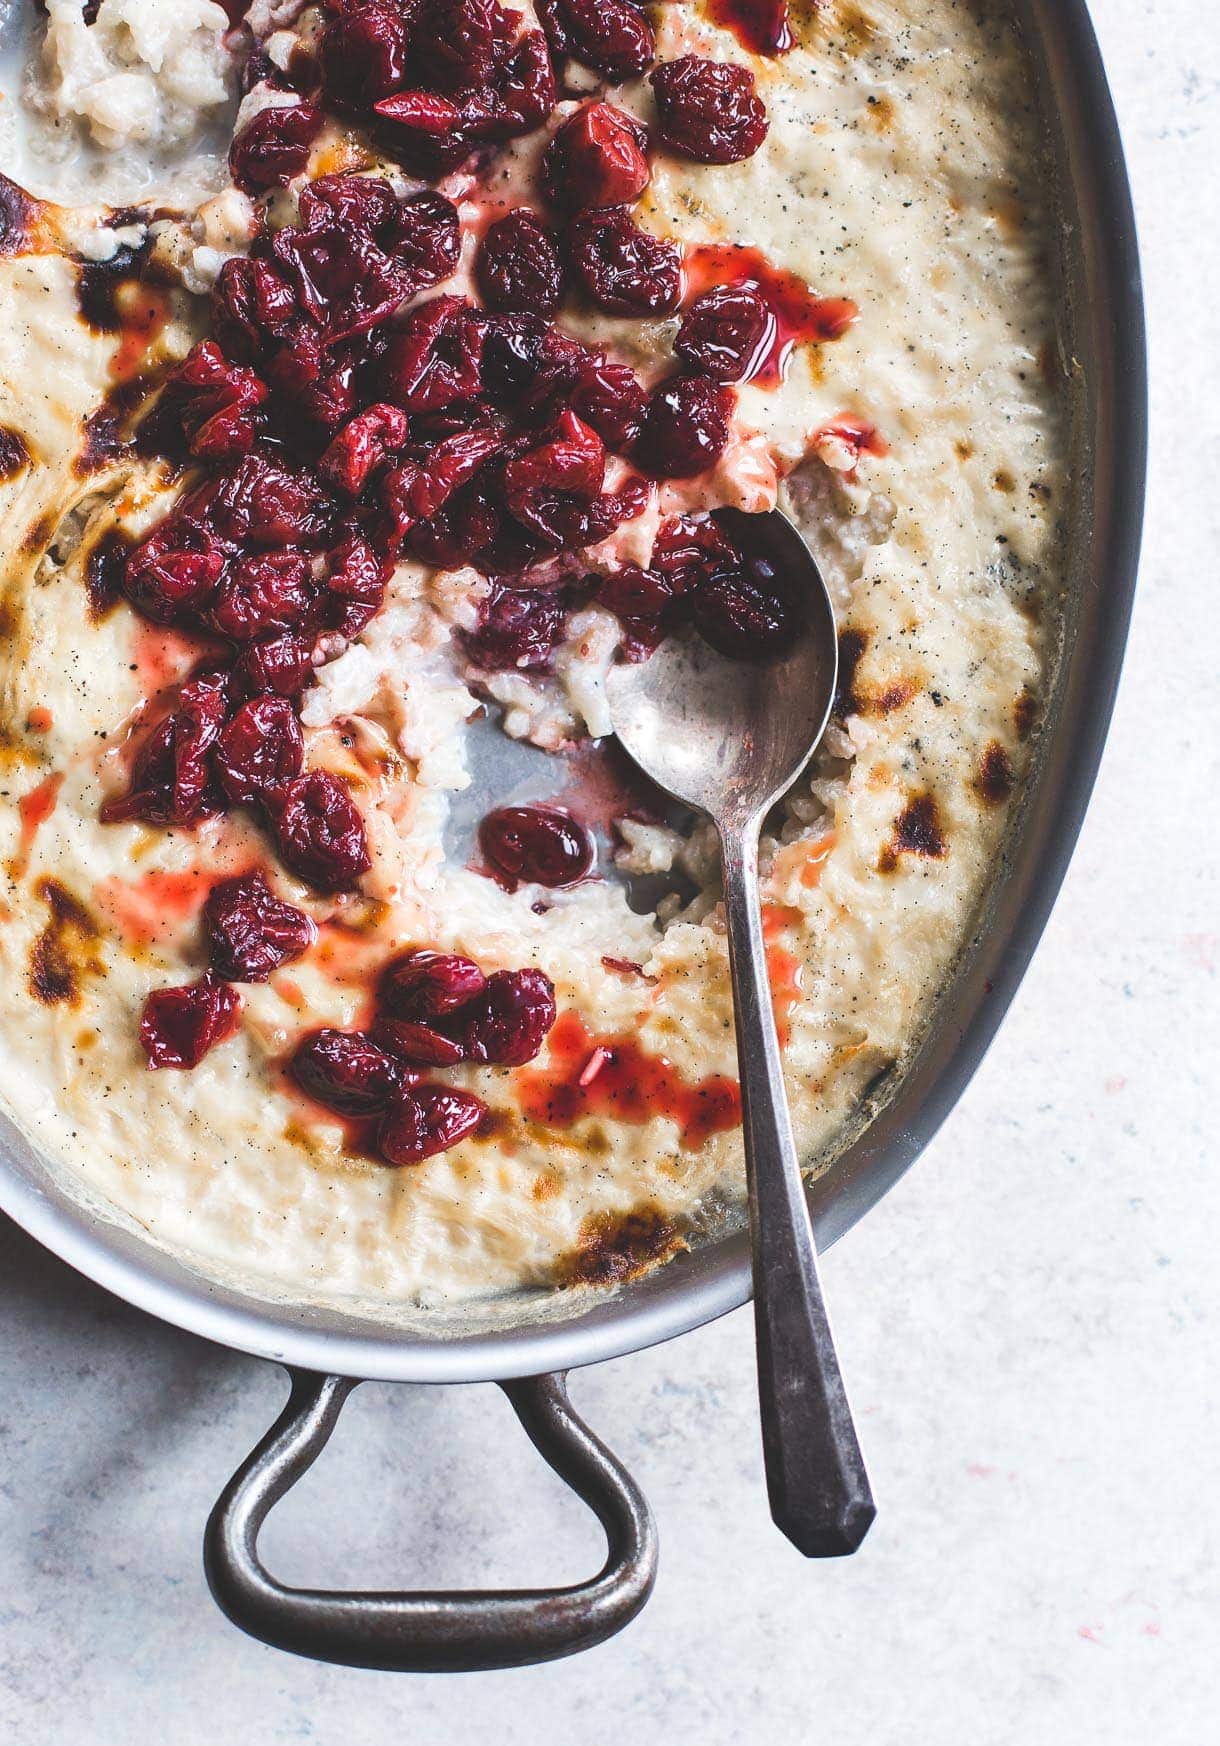 Effortless Vanilla Bean Rice Pudding with Saucy Tart Cherries {baked, so all hands off! so creamy, can be served warm or cold}